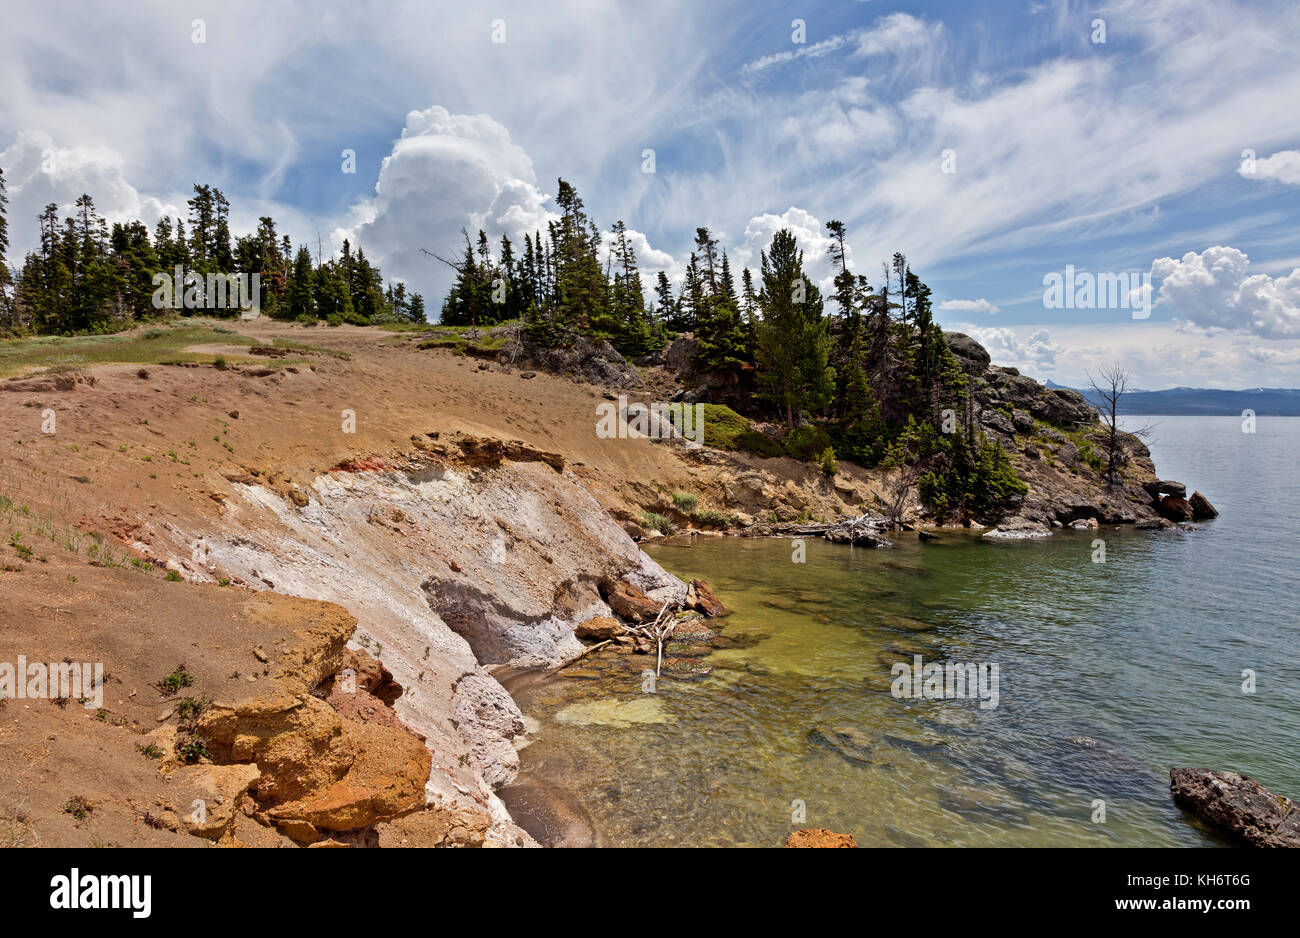 WY02608-00..WYOMING - Storm clouds over Storm Point from the colorful shores of Yellowstone Lake in Yellowstone National Park. Stock Photo